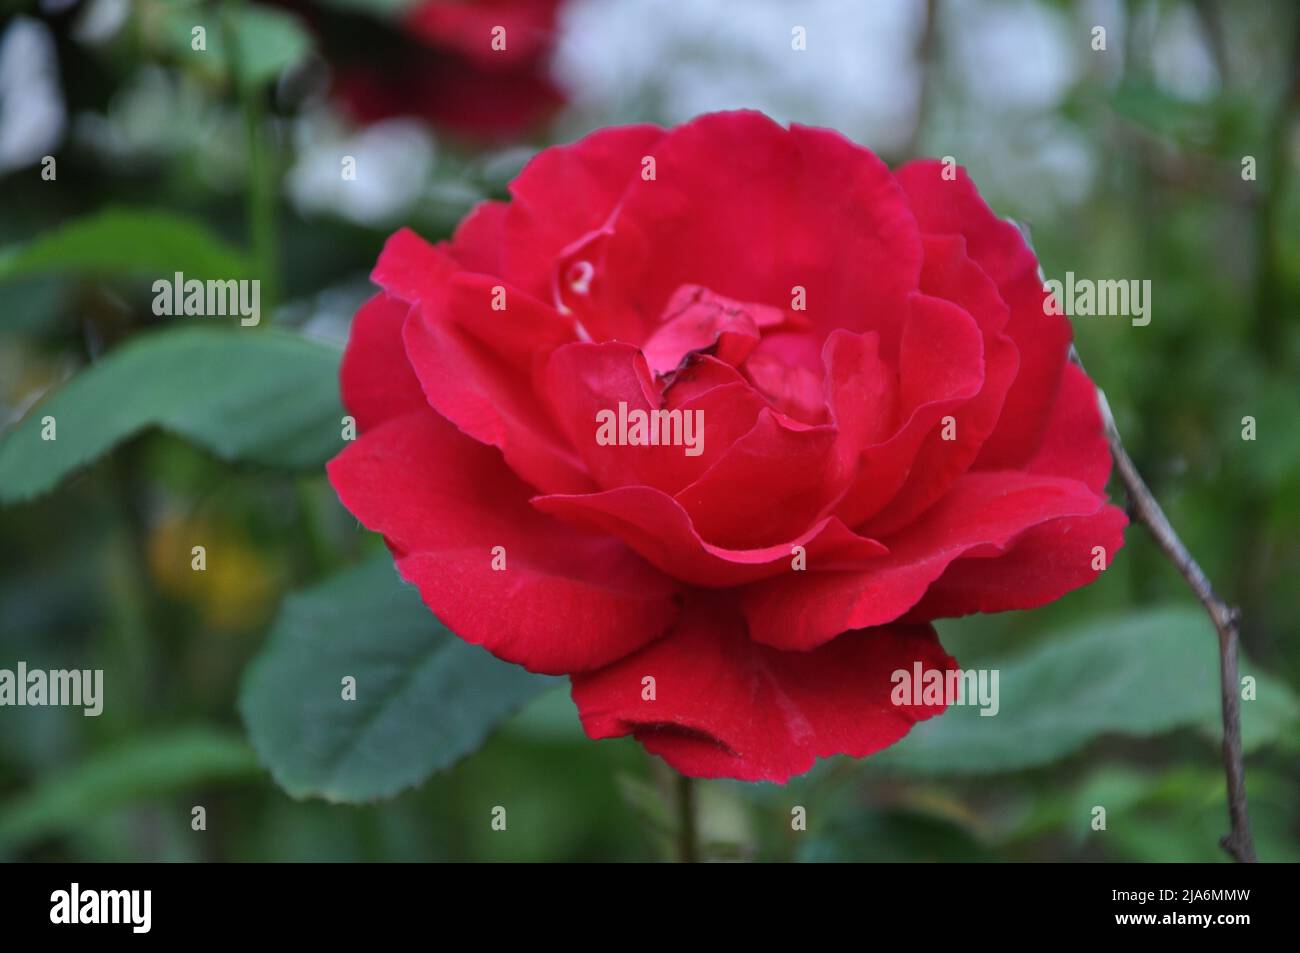 Close-up of a pink rose on a dark green background. High quality photo. Beautiful red rose in a garden. Red rose blossoming in garden after rain. Stock Photo